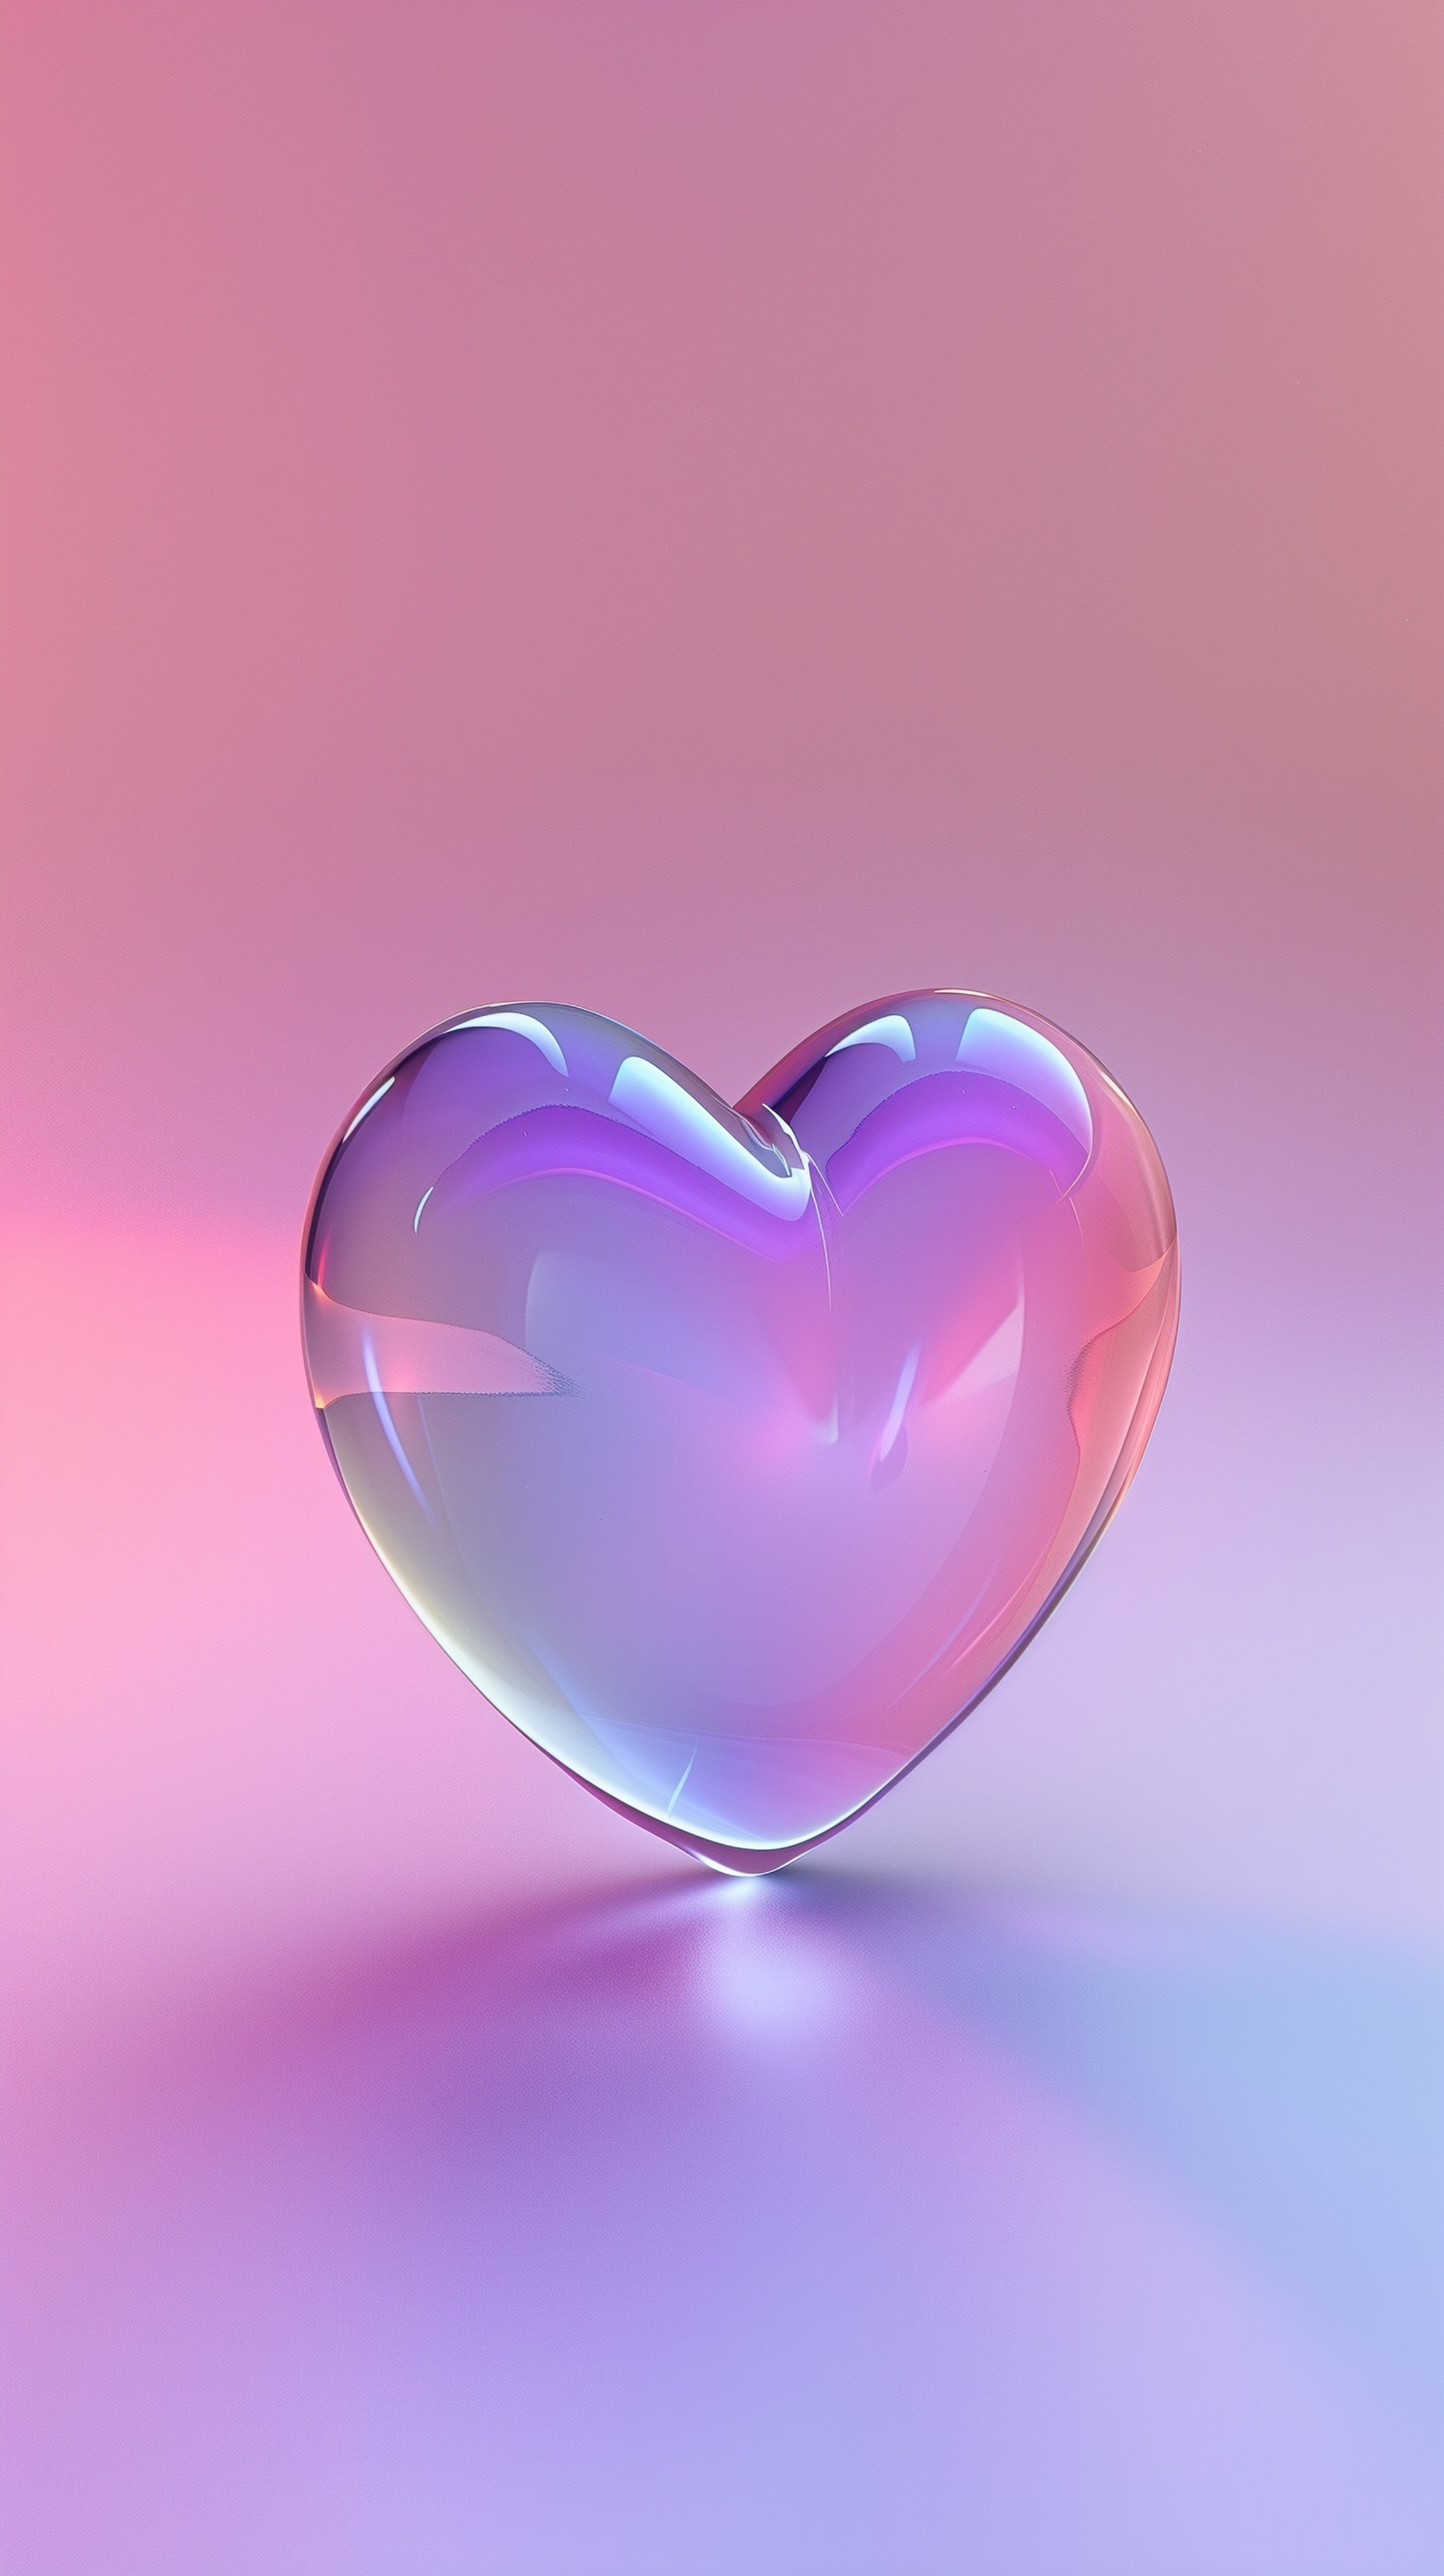 Colorful Glass Heart on Pink Background壁紙[47d8940110524ca1b371]